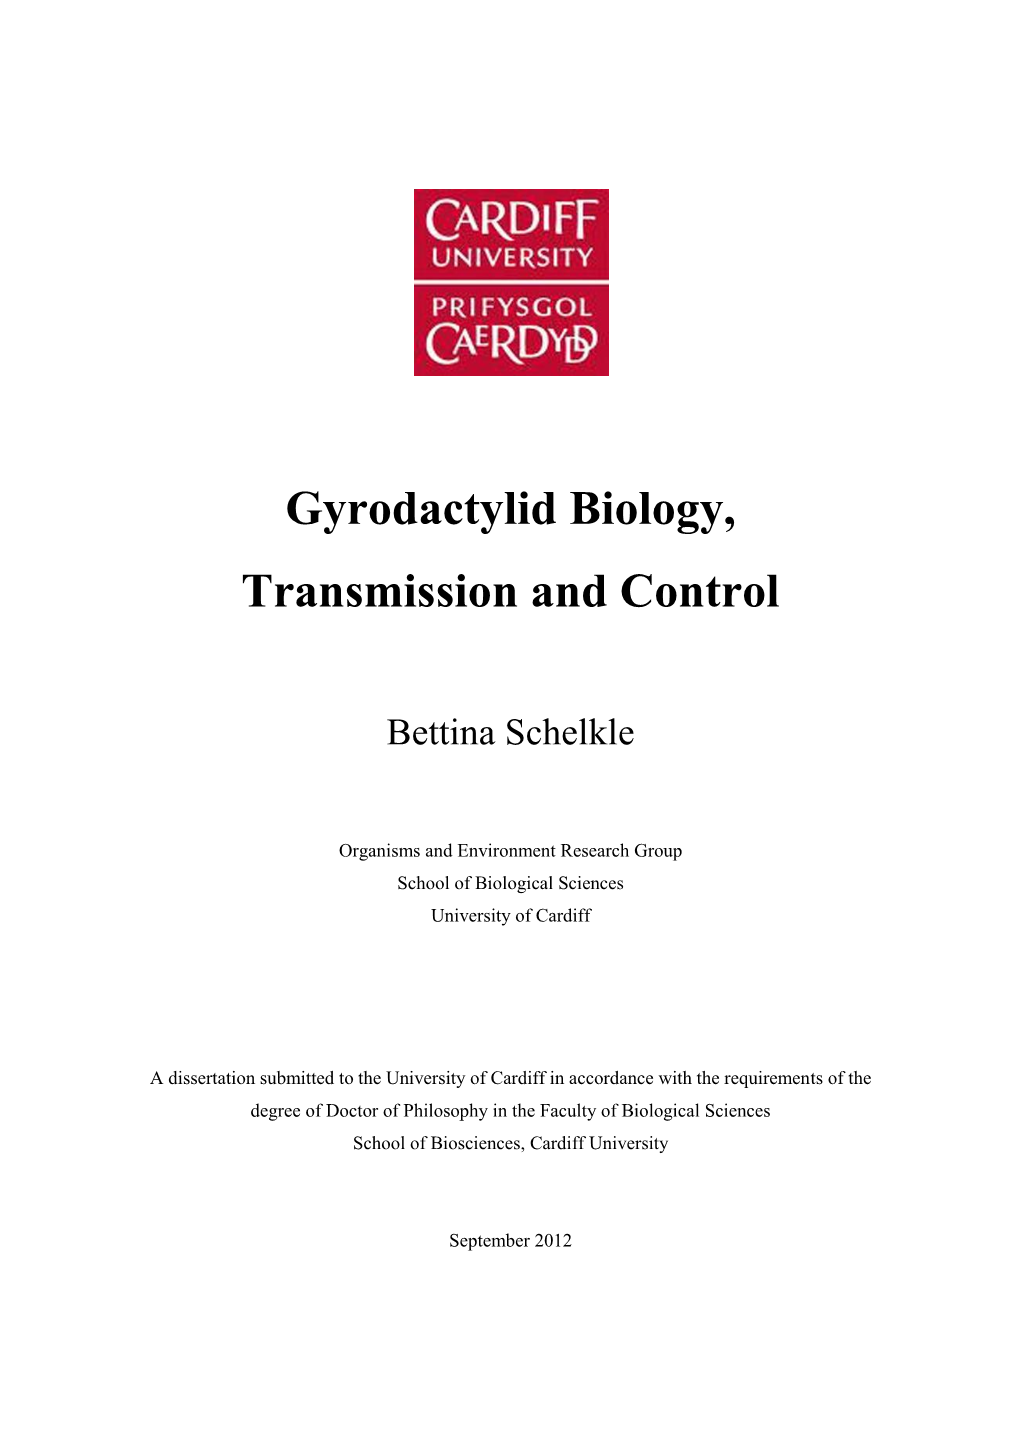 Gyrodactylid Biology, Transmission and Control